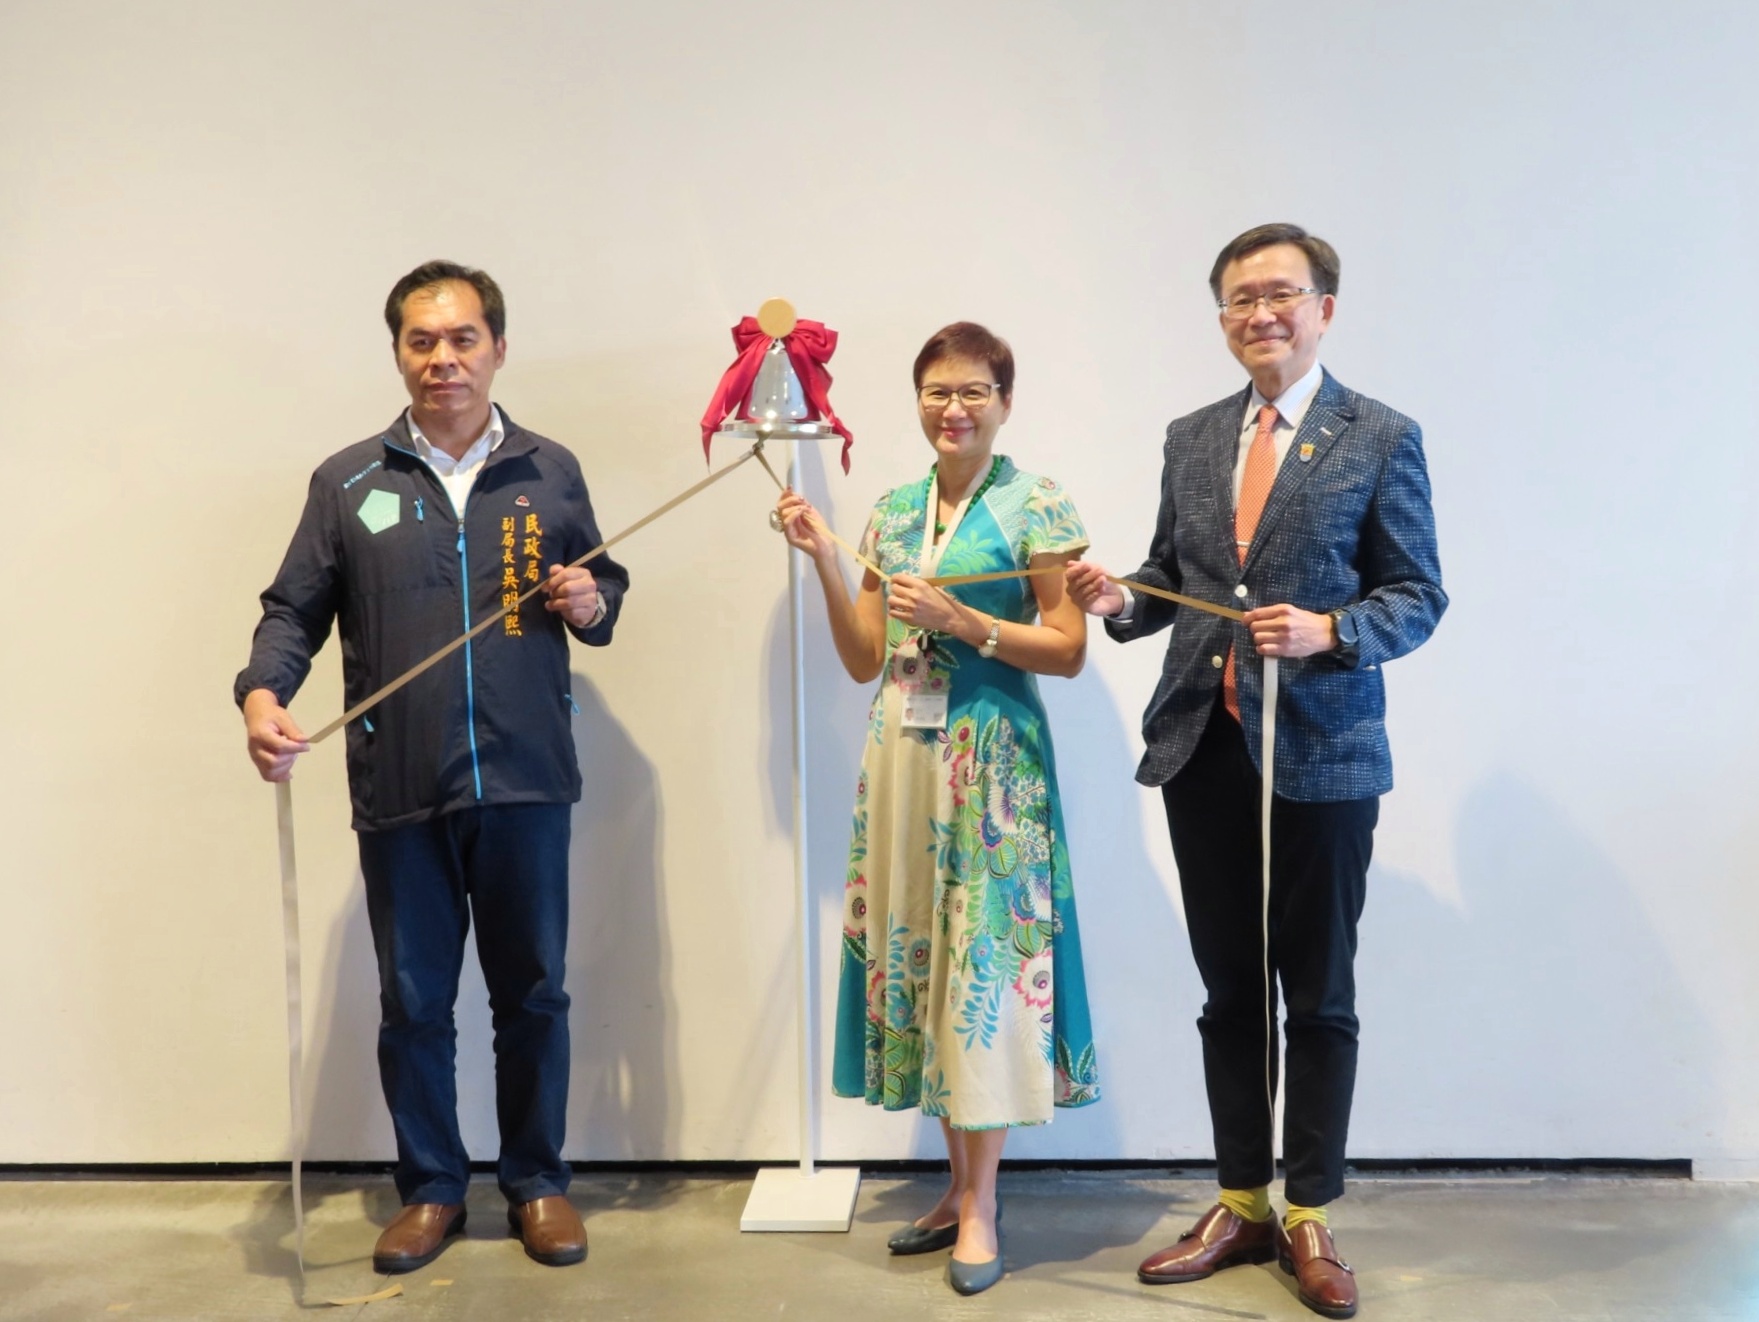 Tainan Art Museum and NCKU Launch "Ringing Silver Bells Project".